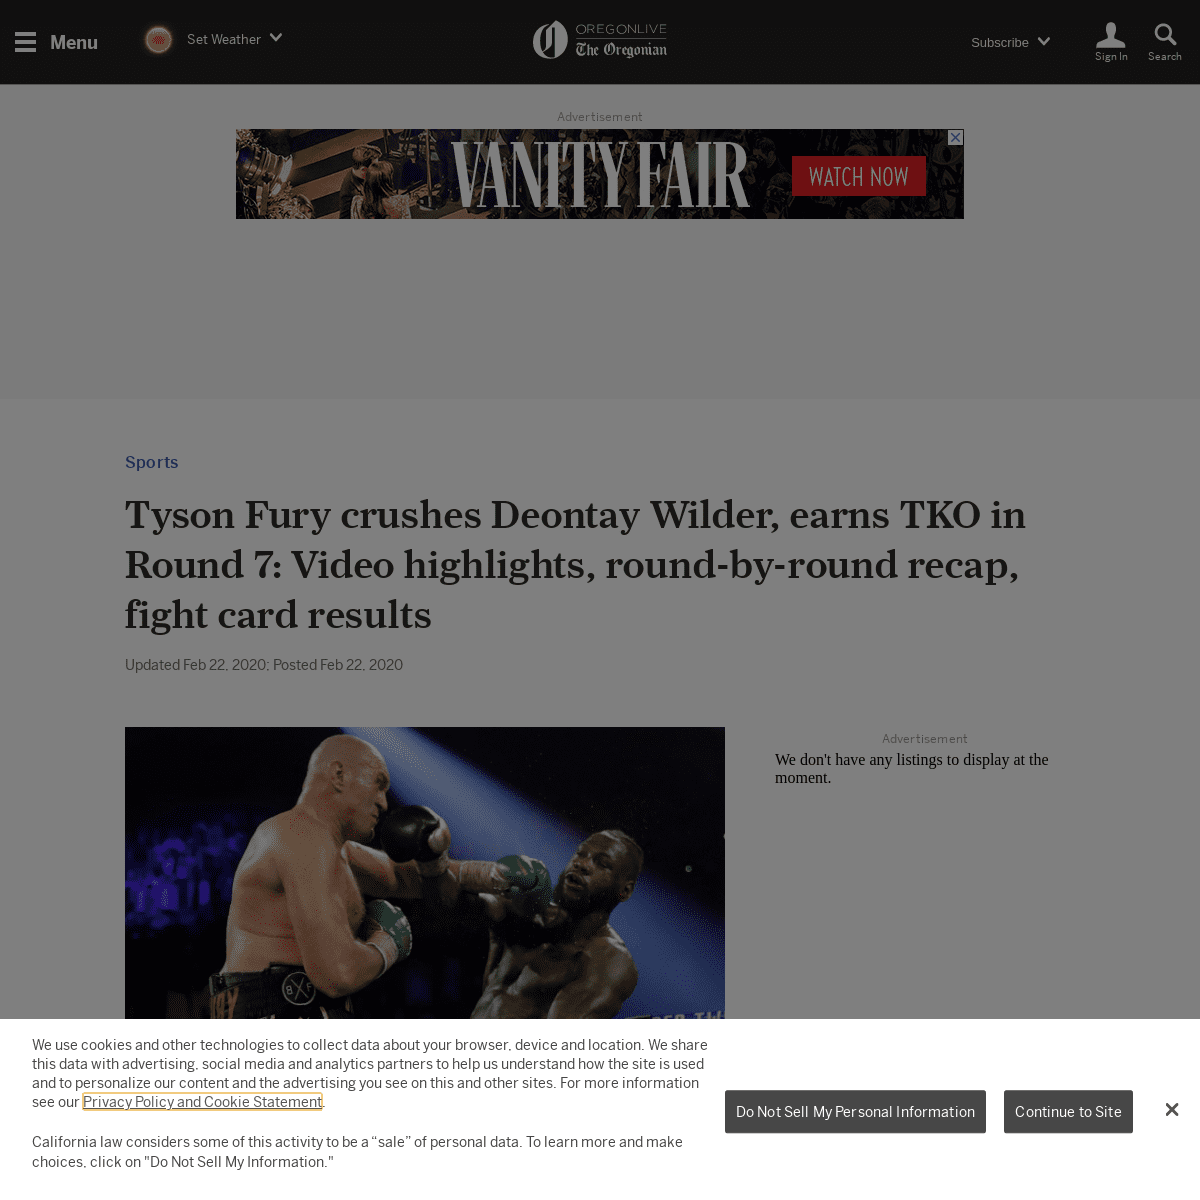 A complete backup of www.oregonlive.com/sports/2020/02/deontay-wilder-vs-tyson-fury-2-live-stream-how-to-watch-on-espn-plus-ppv-